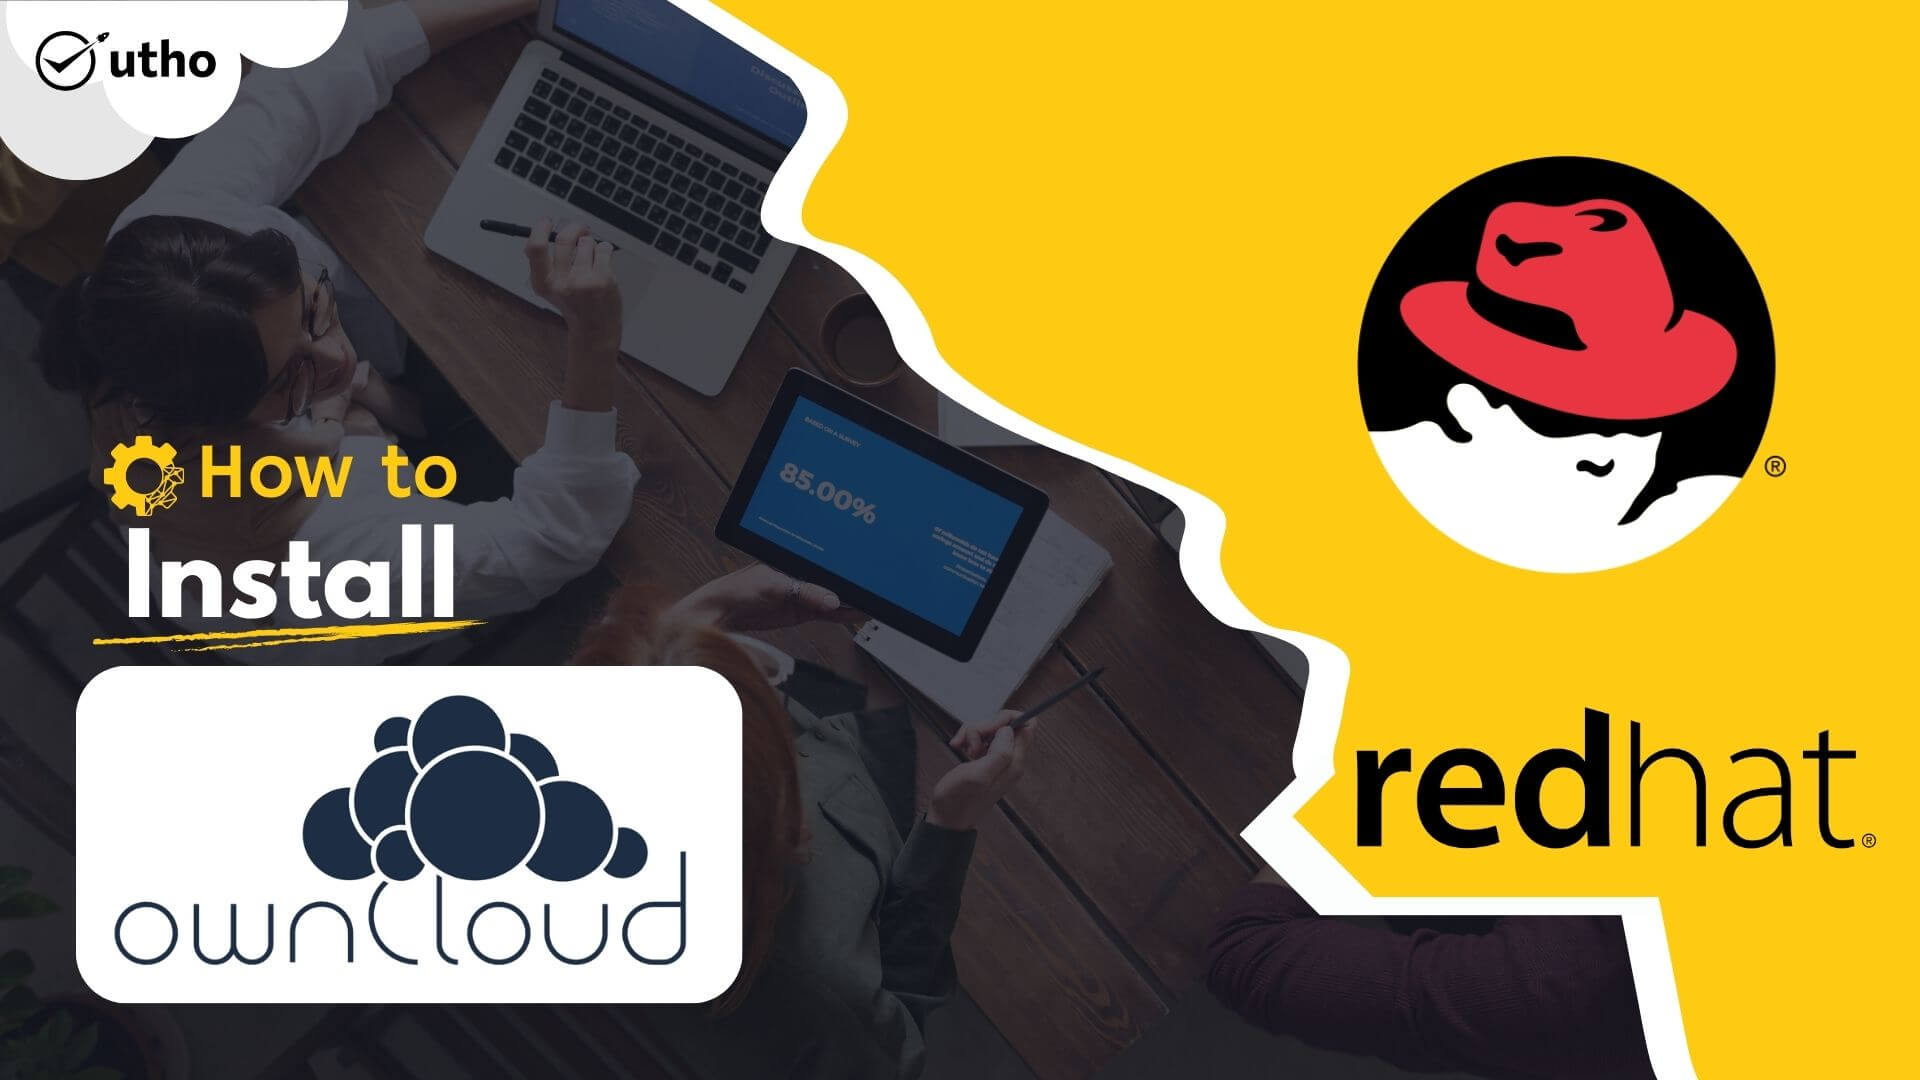 How to install owncloud on Redhat